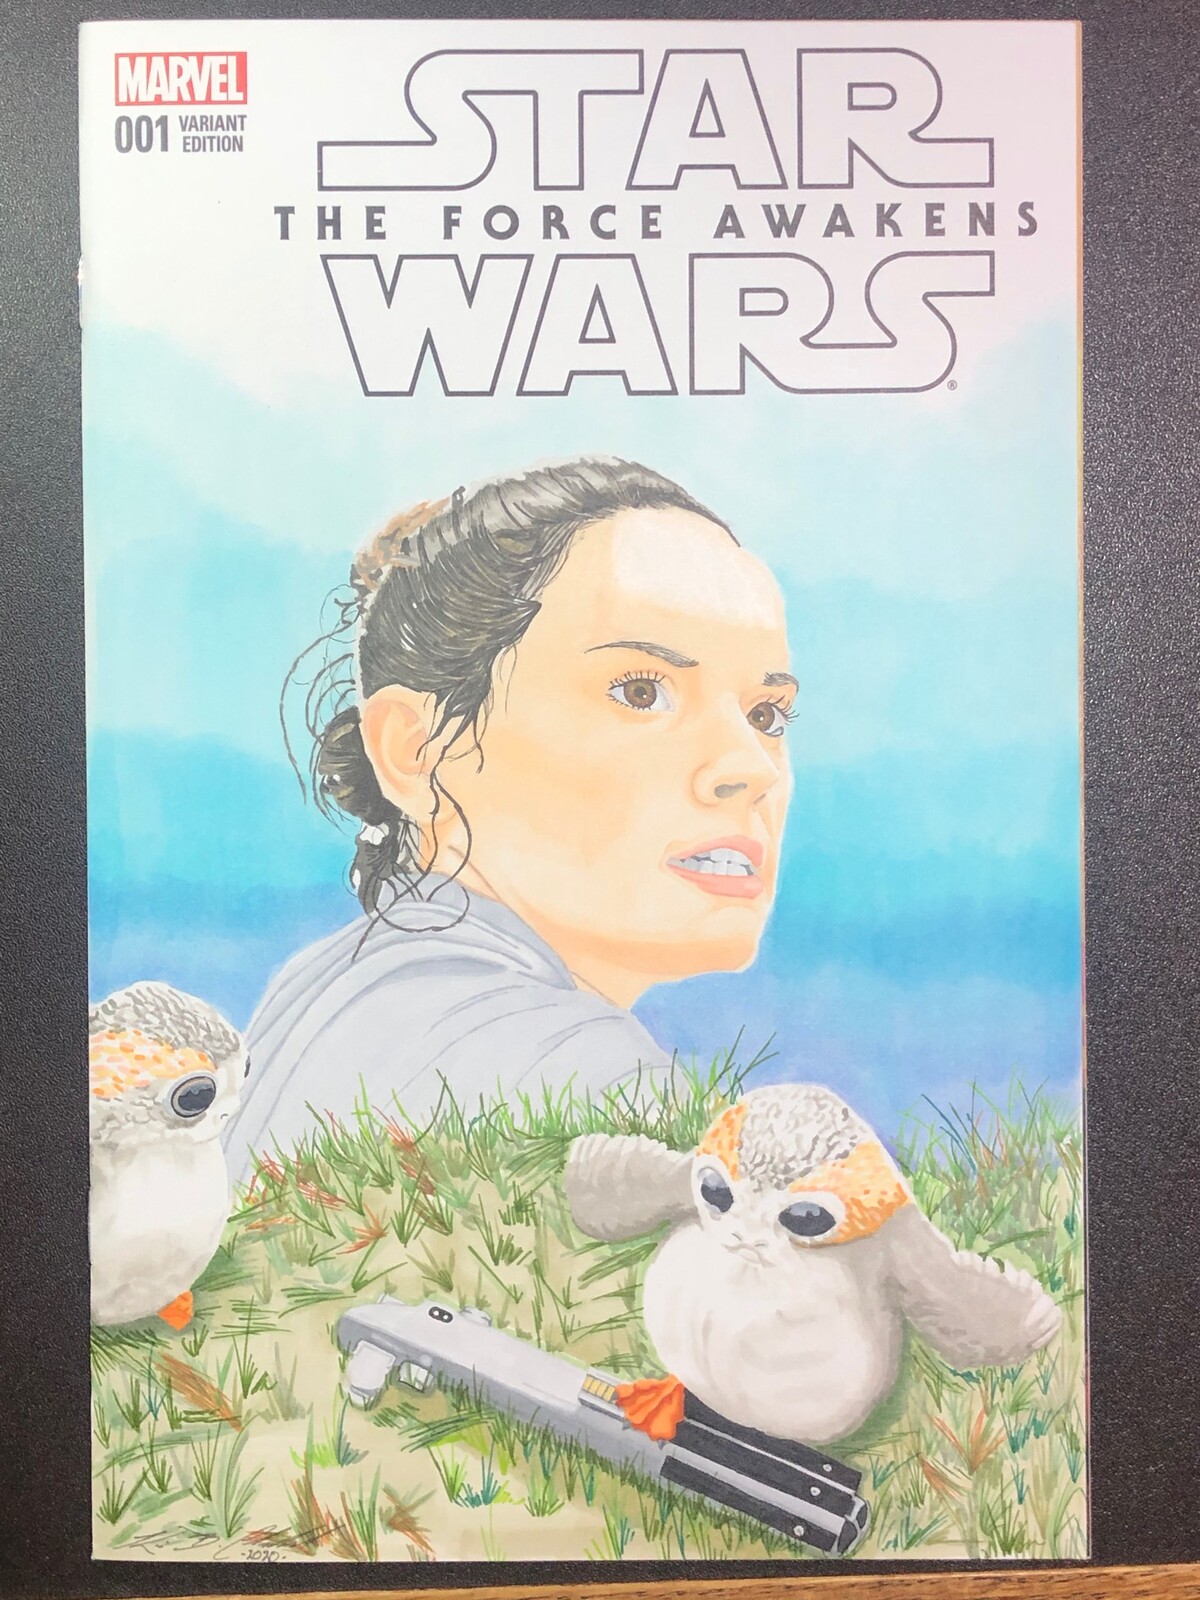 Comic cover art commission - Rey and Porgs